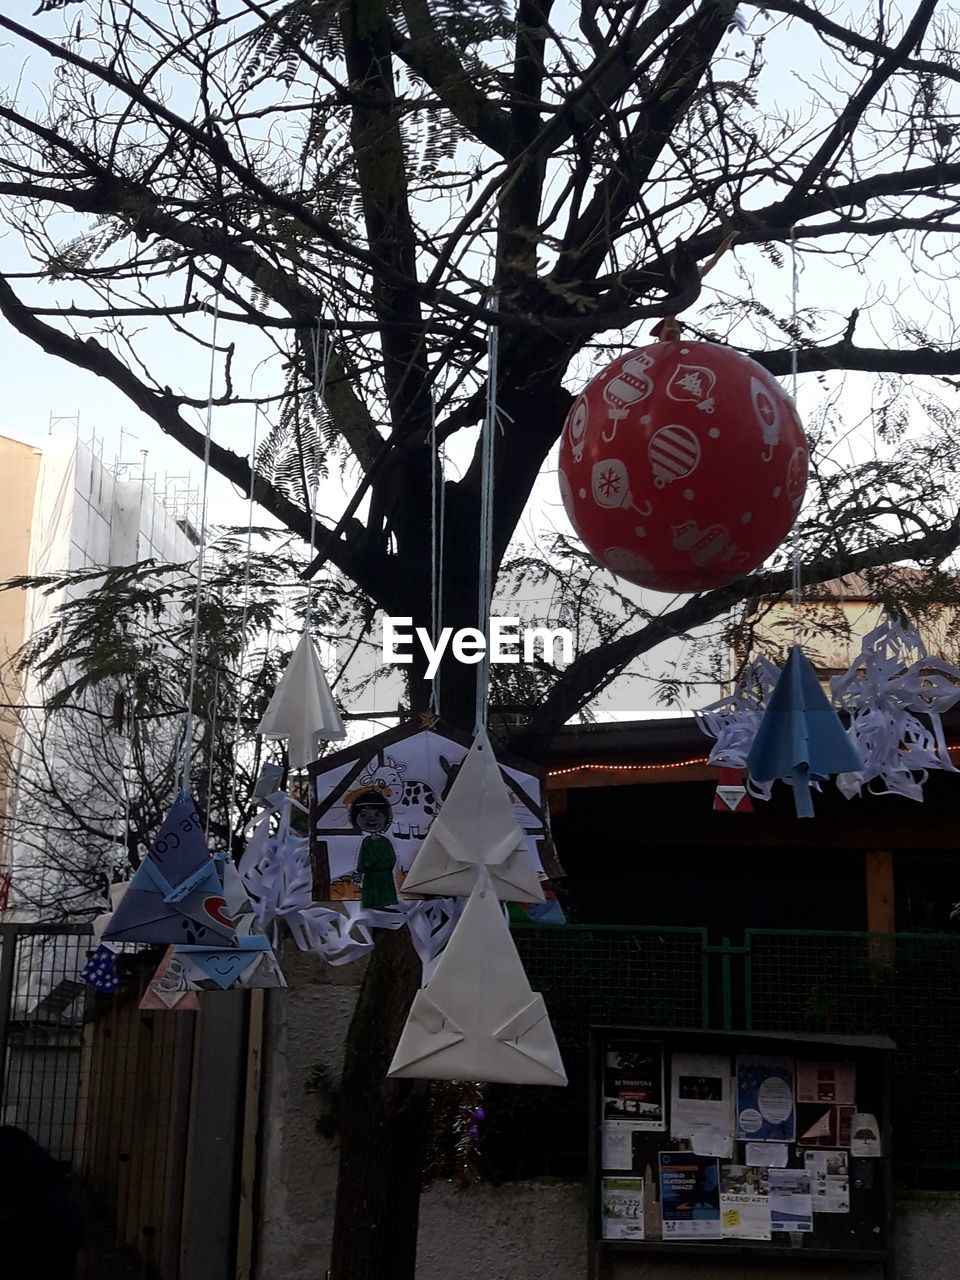 CLOTHES HANGING ON TREE